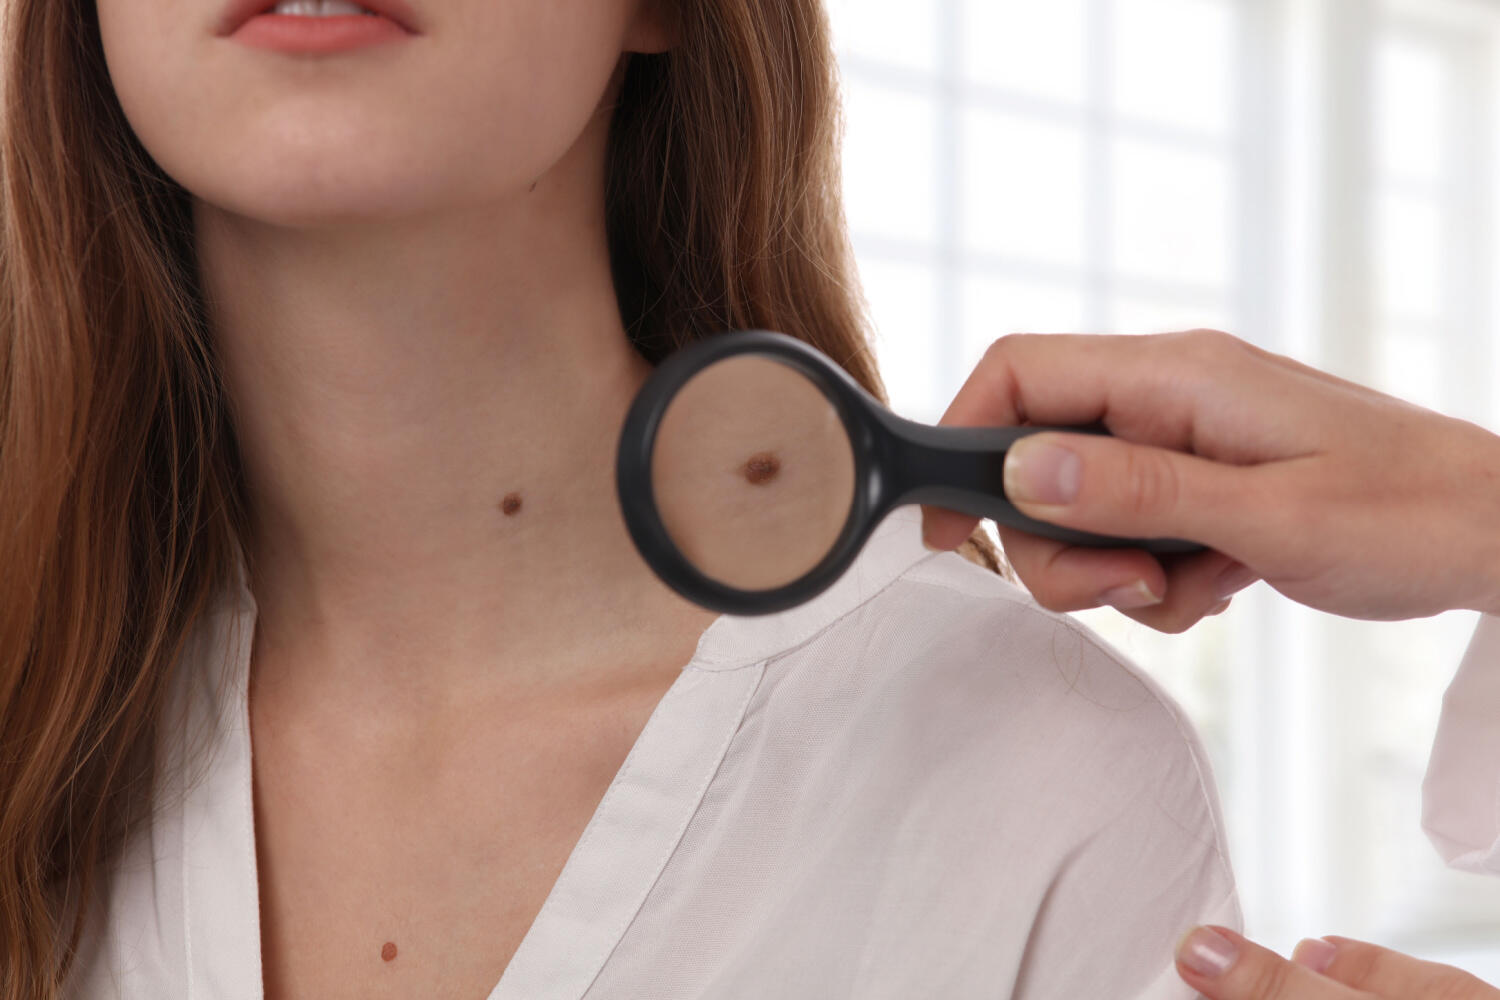 Skin tags during pregnancy